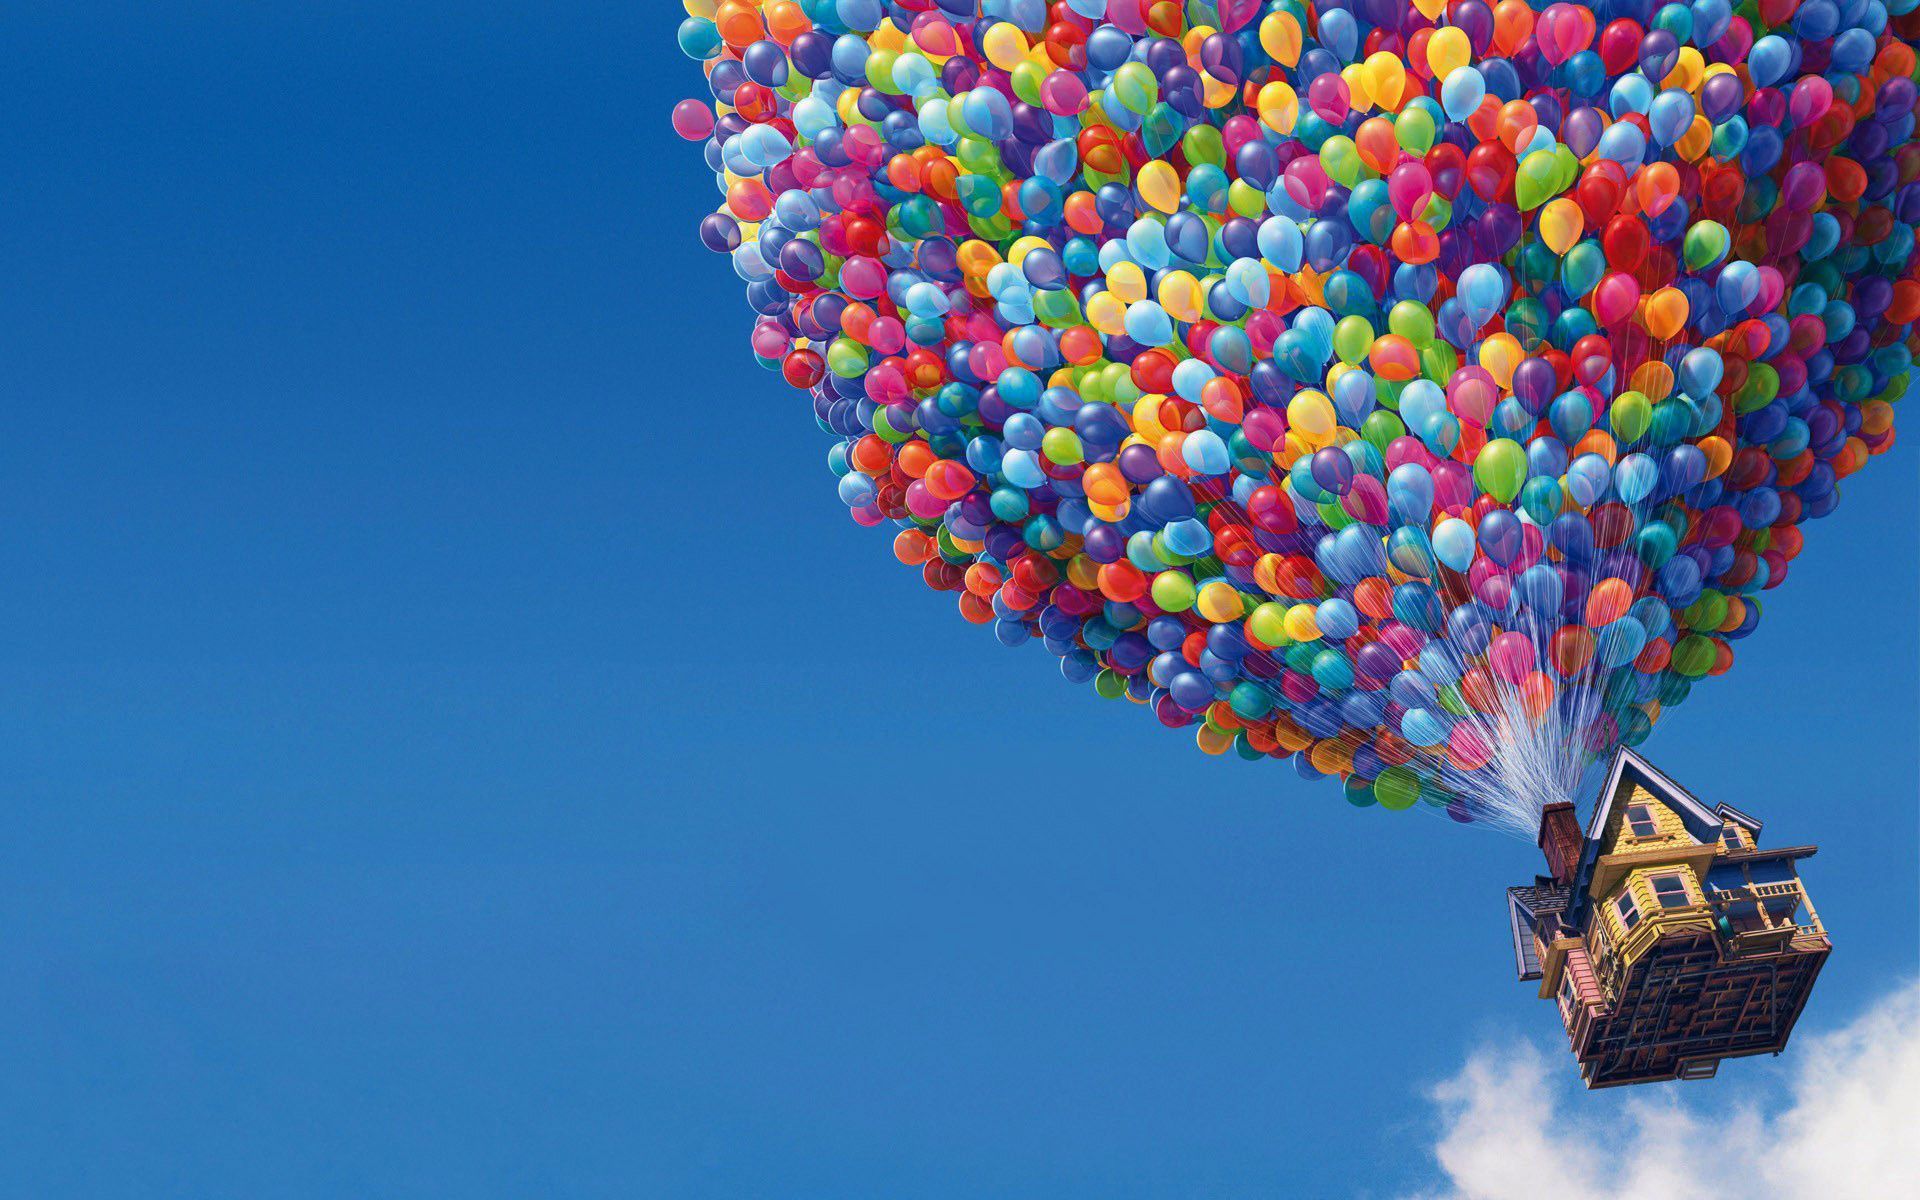 UP Movie Balloons House Wallpapers | HD Wallpapers